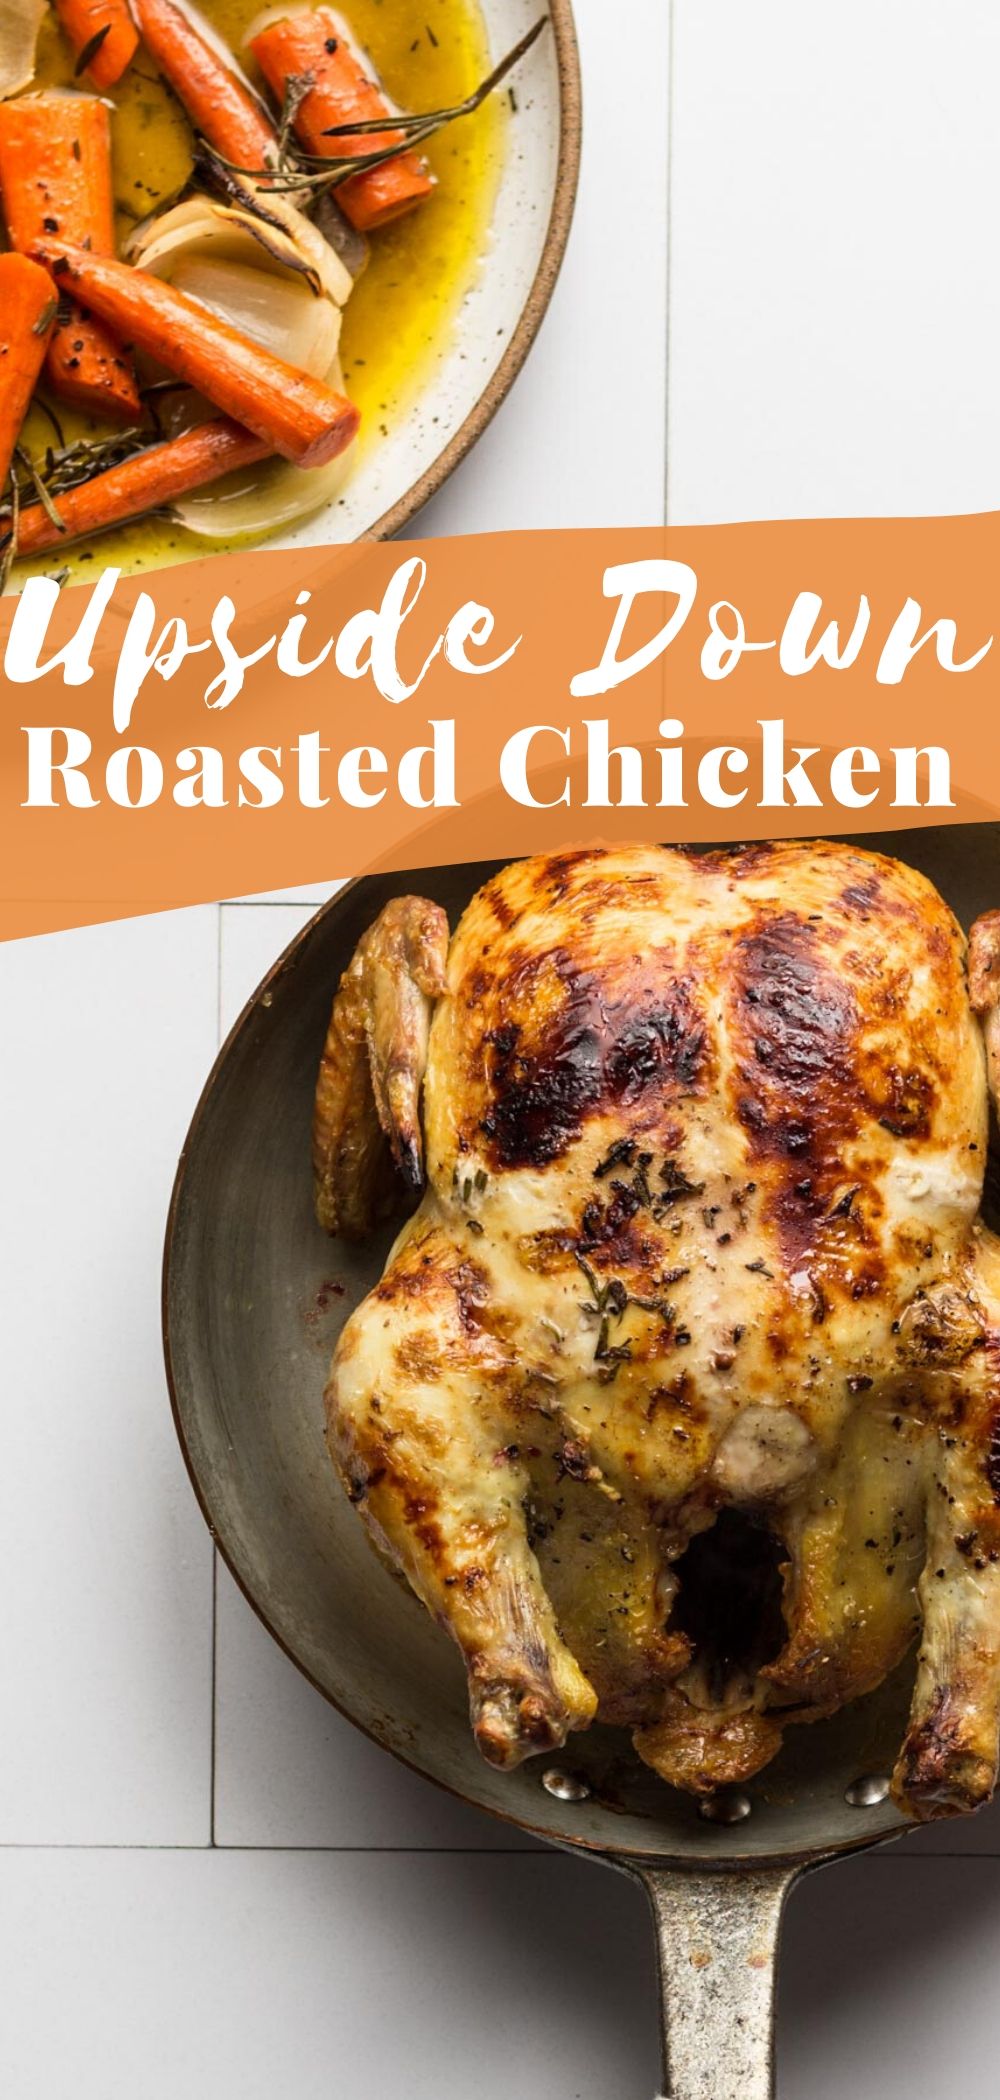 Roast a chicken upside to ensure moist and tender breast meat everytime! via @bessiebakes